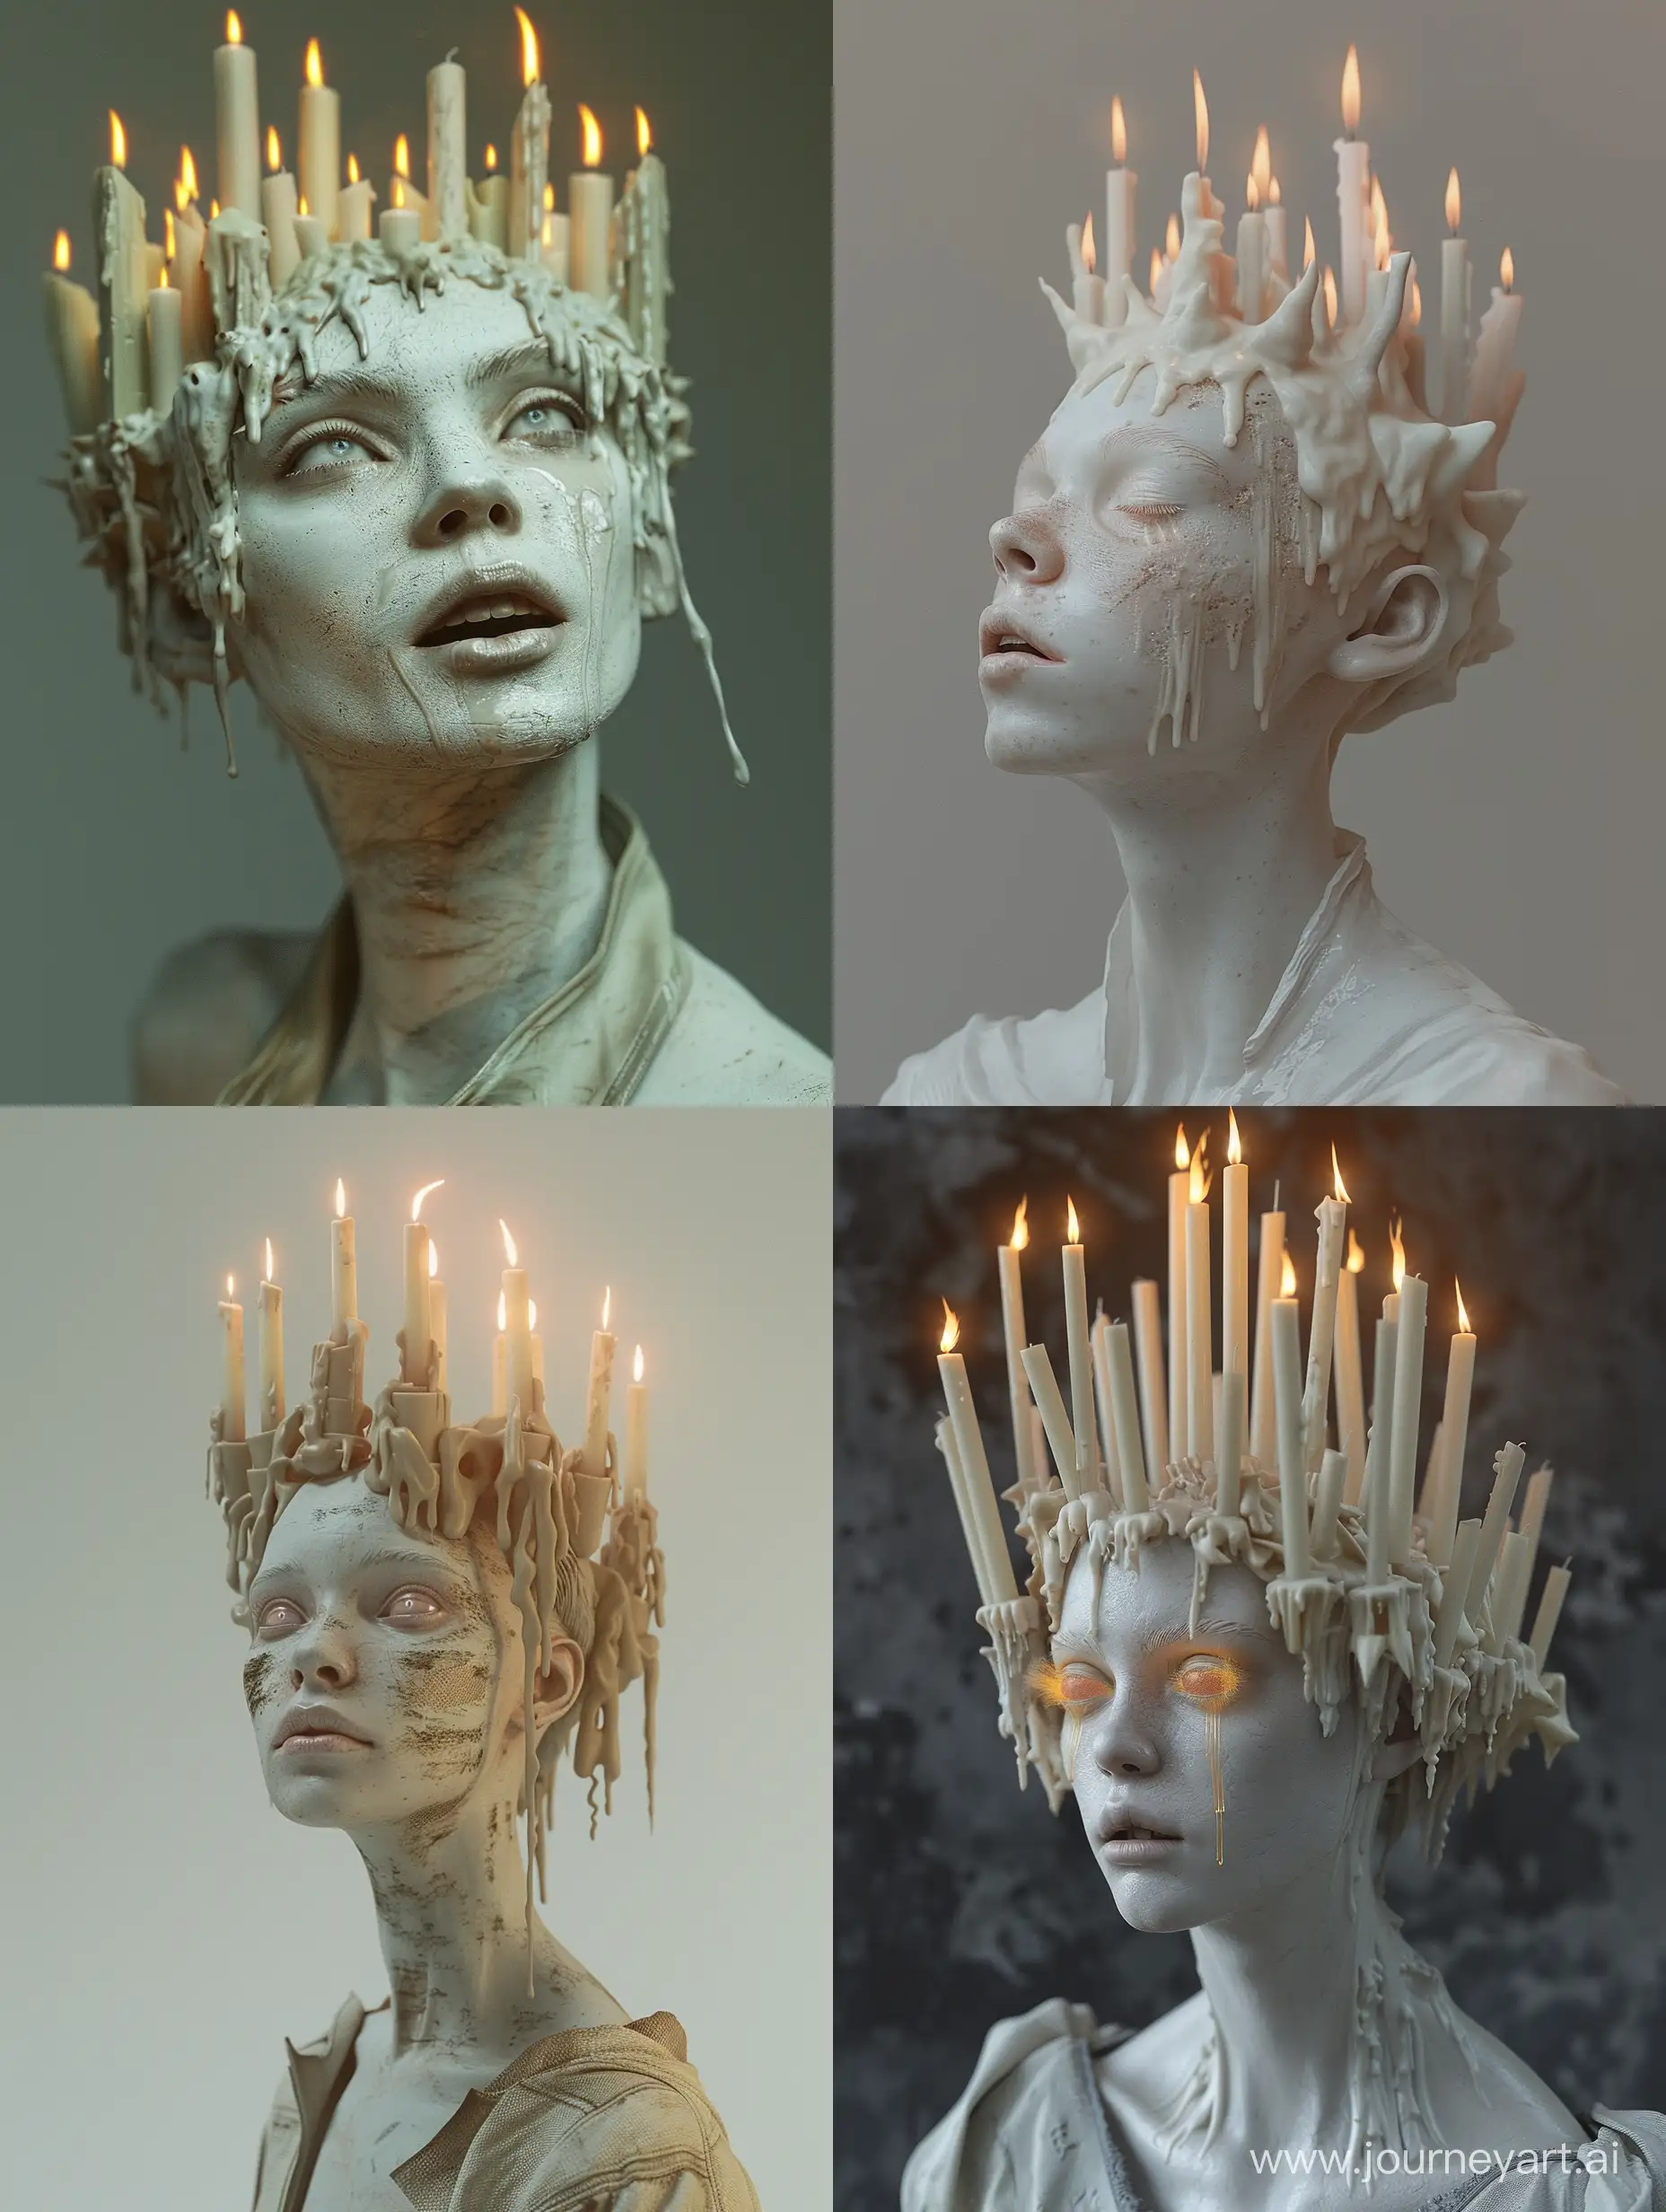 Surrealist-Sculpture-Statue-of-Woman-with-Candles-in-Fiery-Illumination